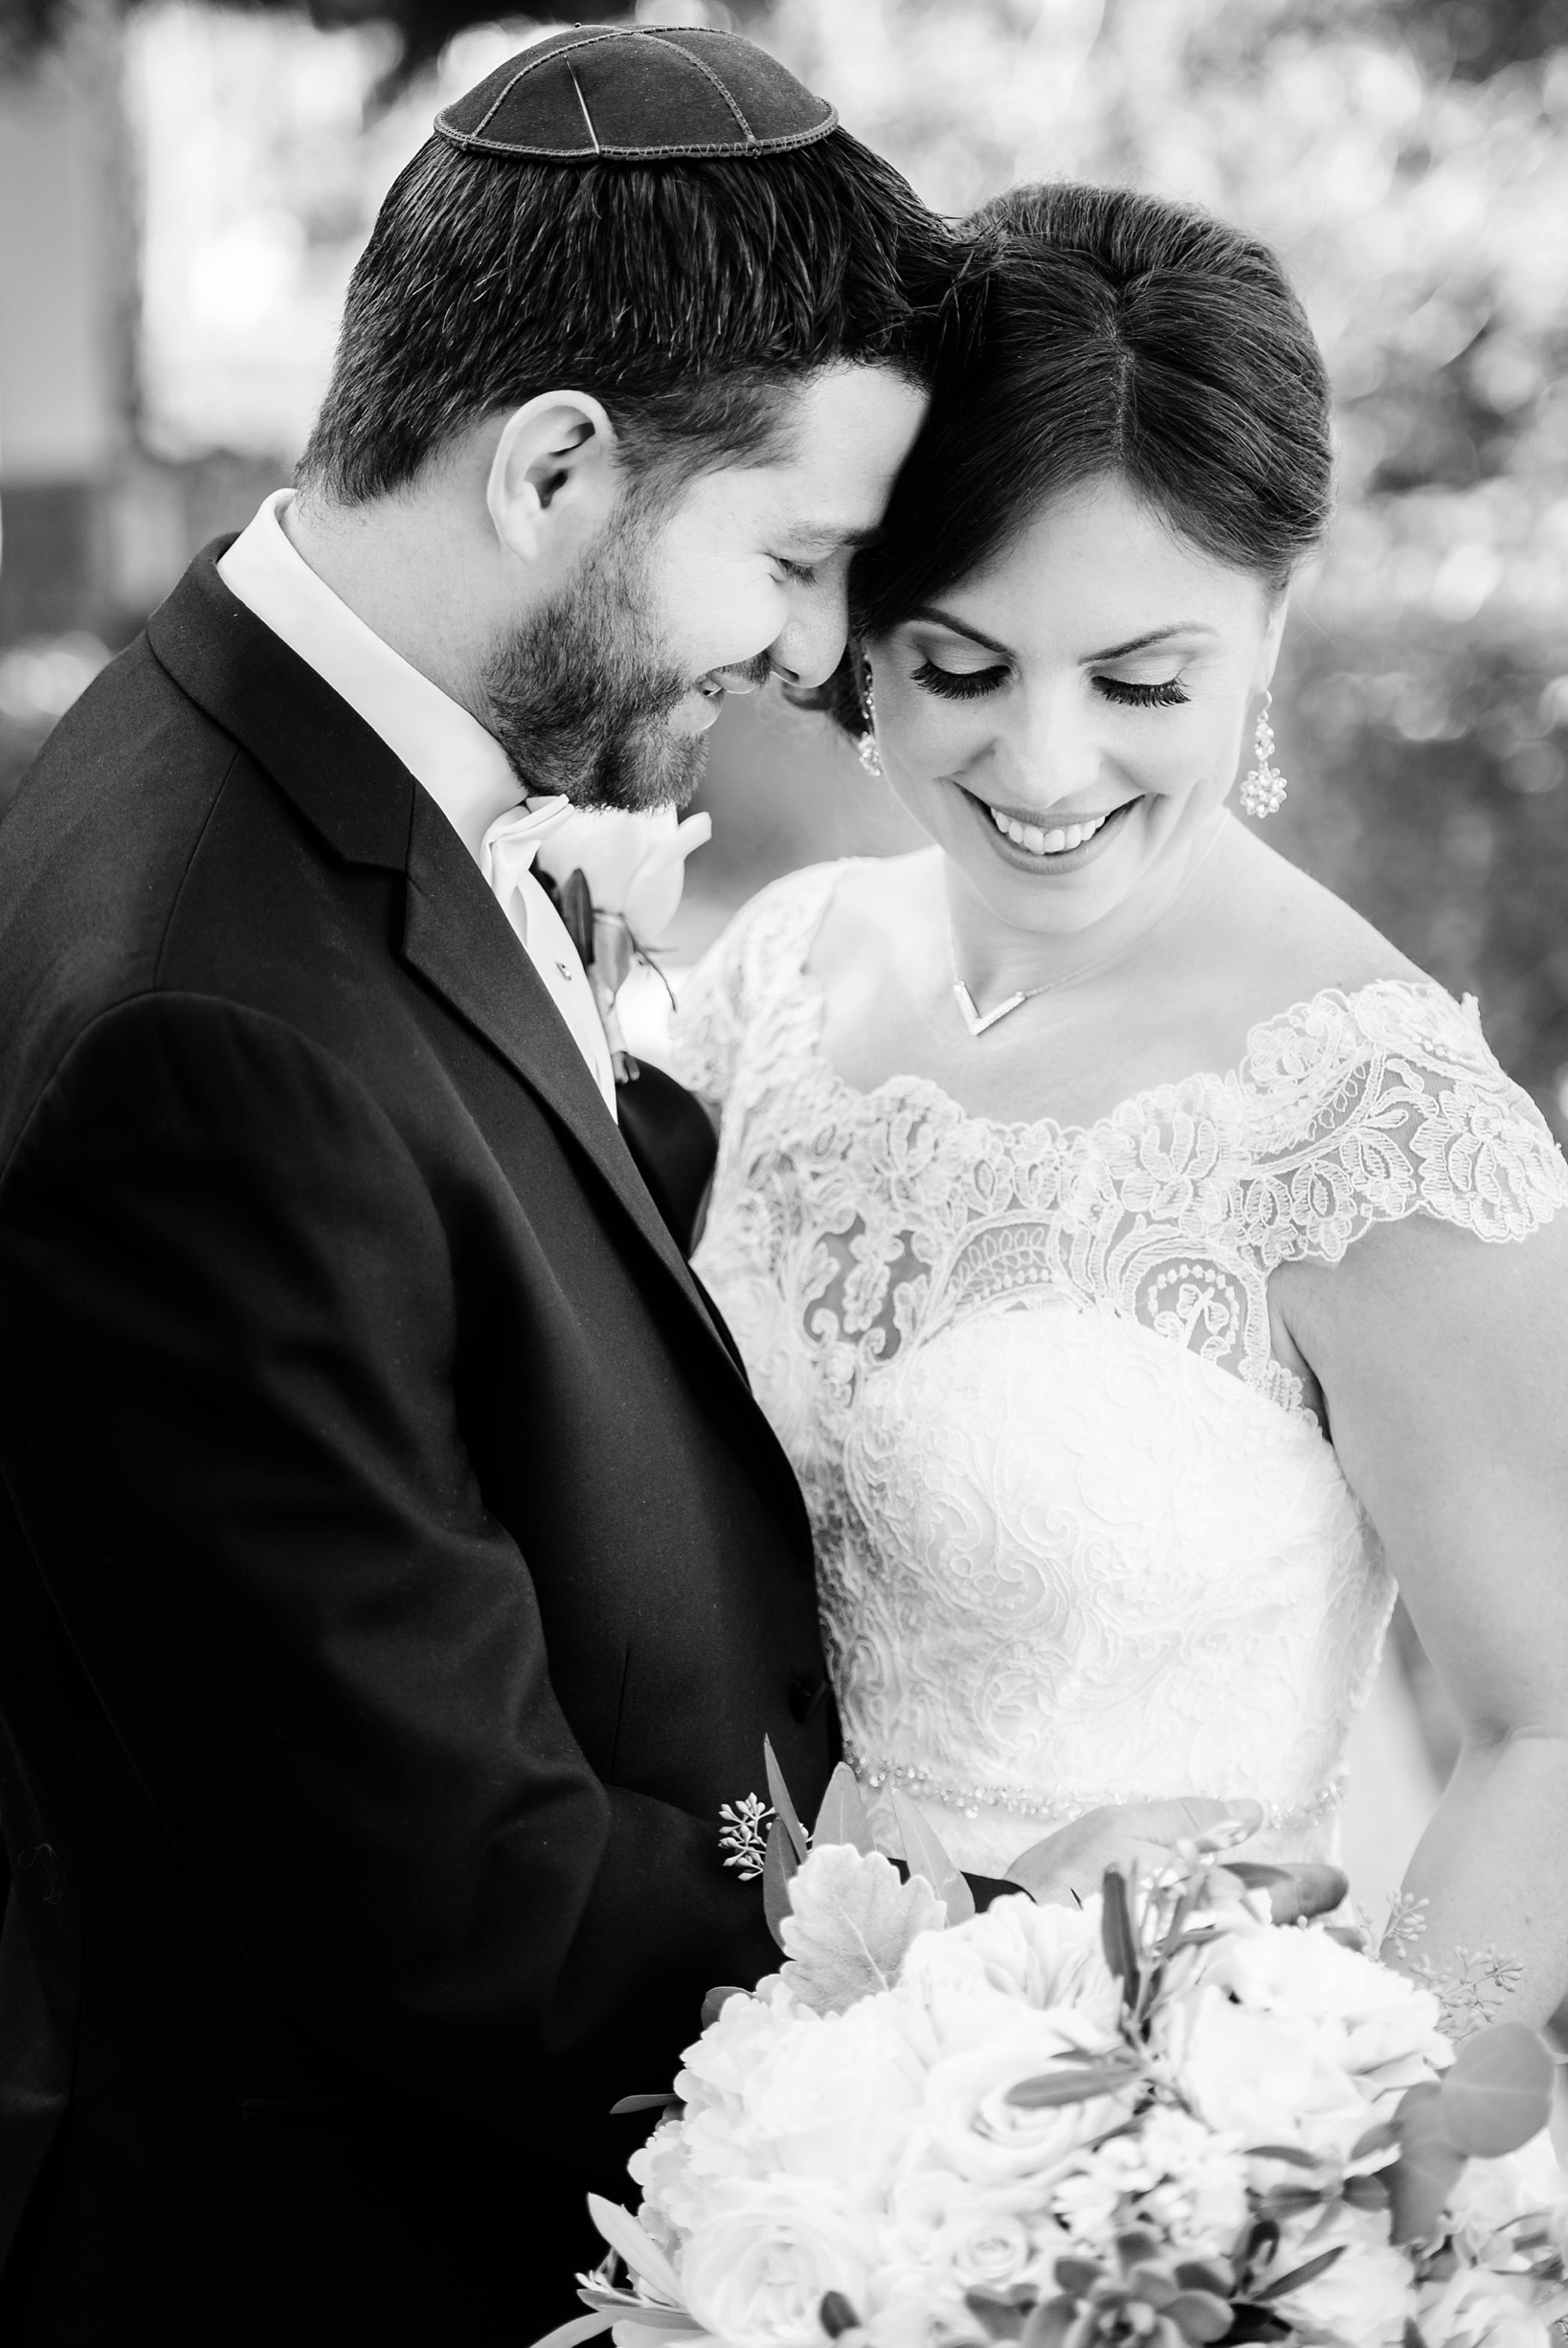 Black and White image of the bride and groom by Sarah & Ben Photography